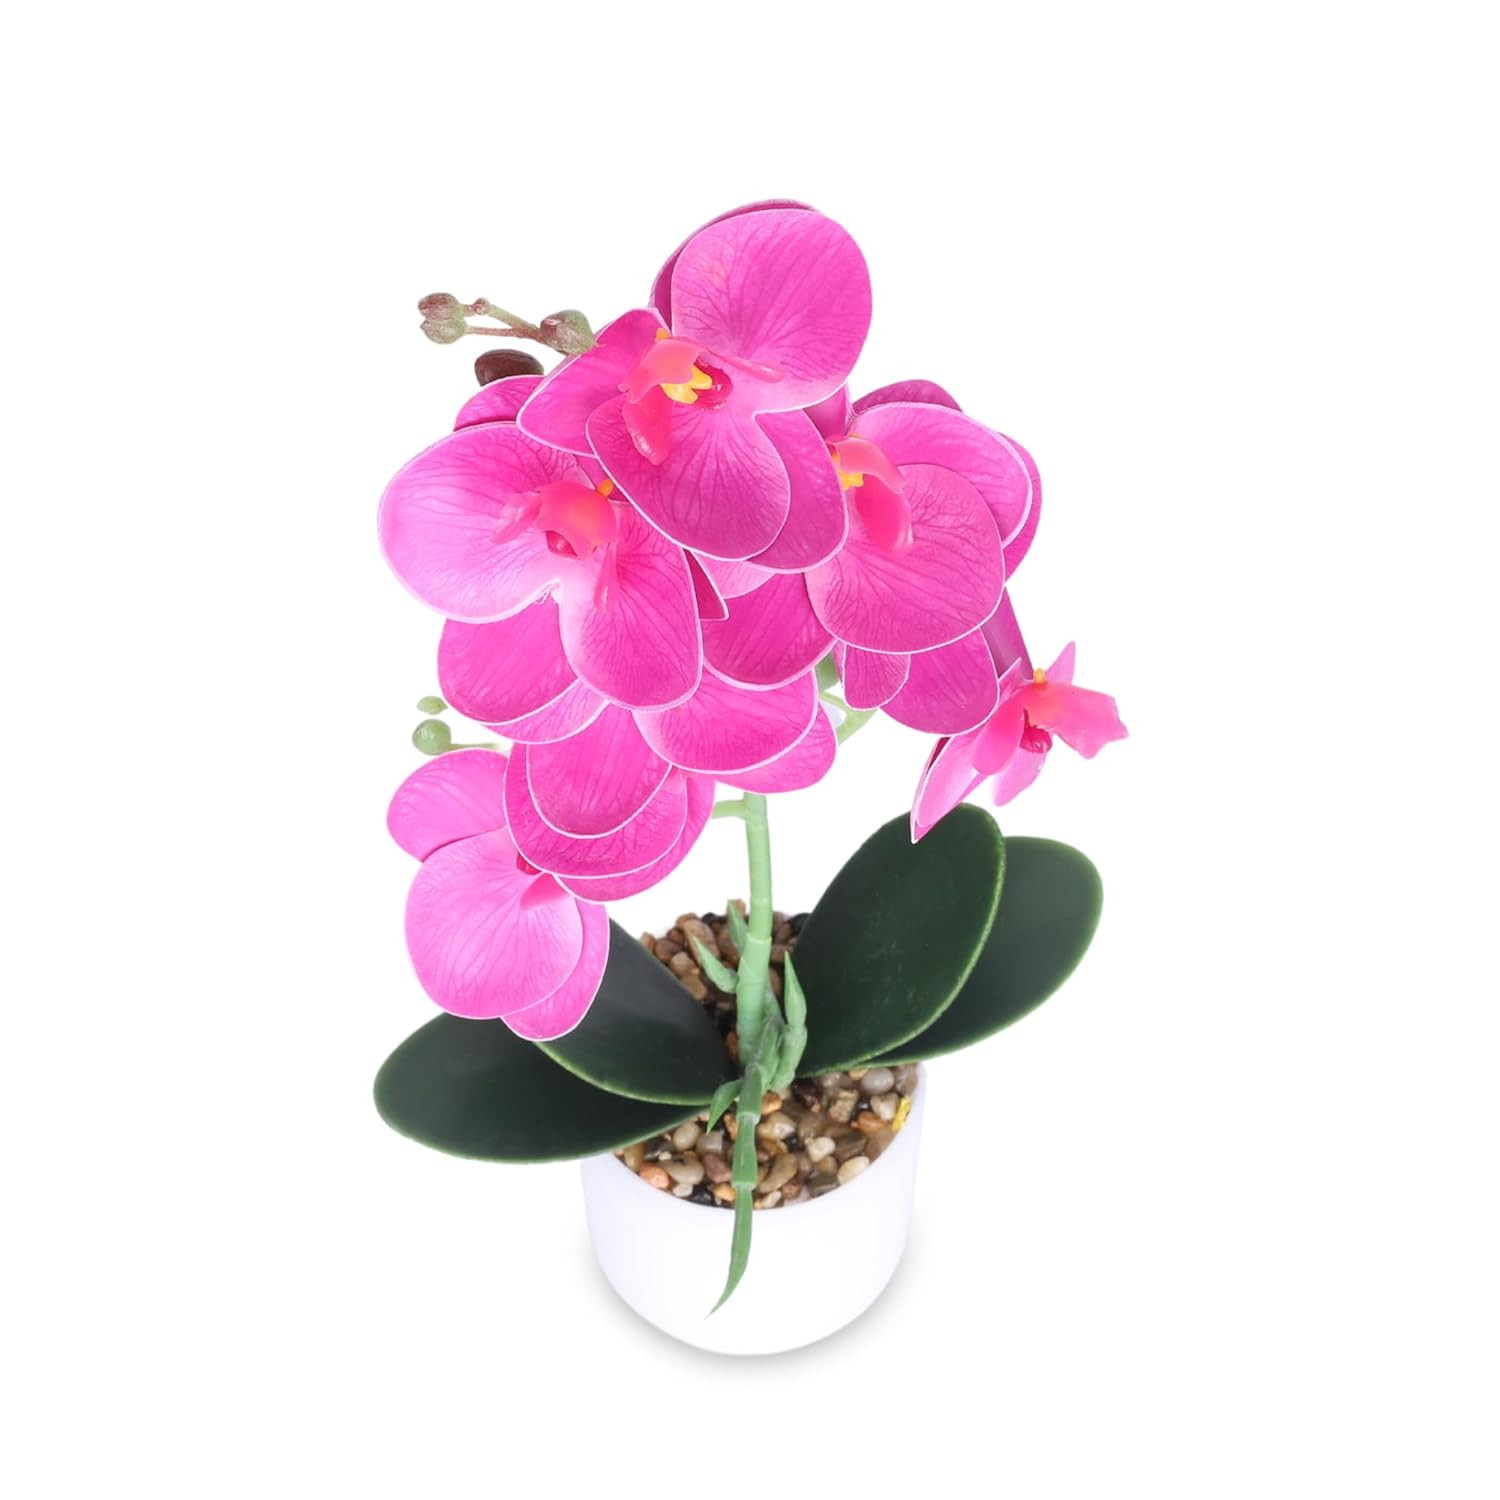 Kuber Industries Artificial Plants for Home DÃ©cor|Natural Looking Indoor Fake Plants with Pot|Artificial Flowers for Decoration (Pink)